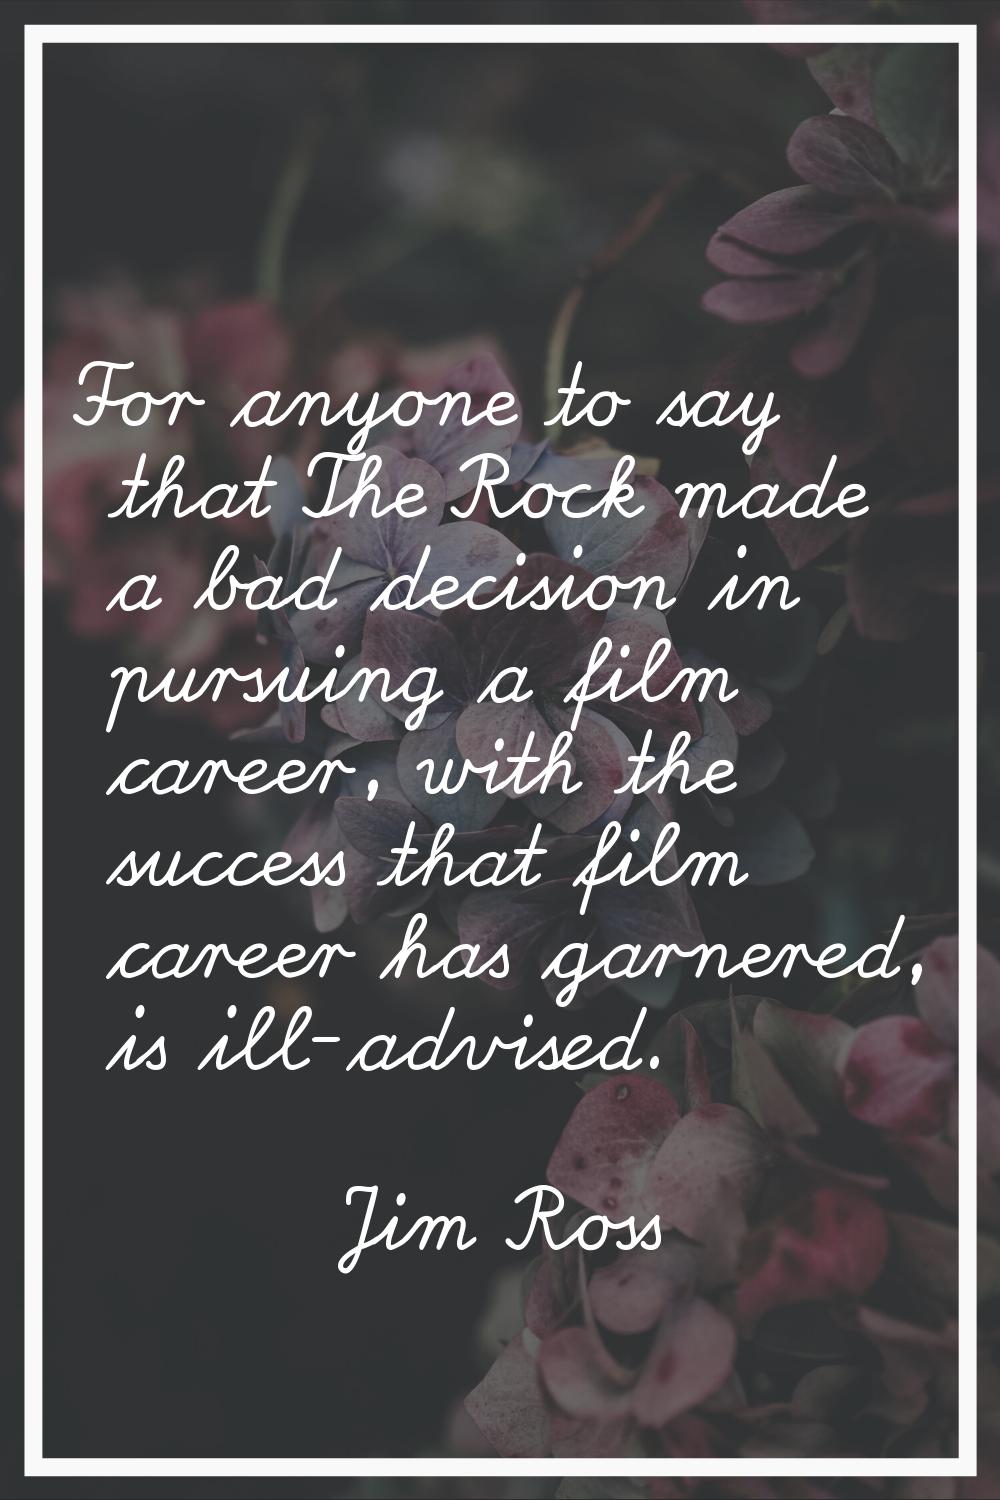 For anyone to say that The Rock made a bad decision in pursuing a film career, with the success tha